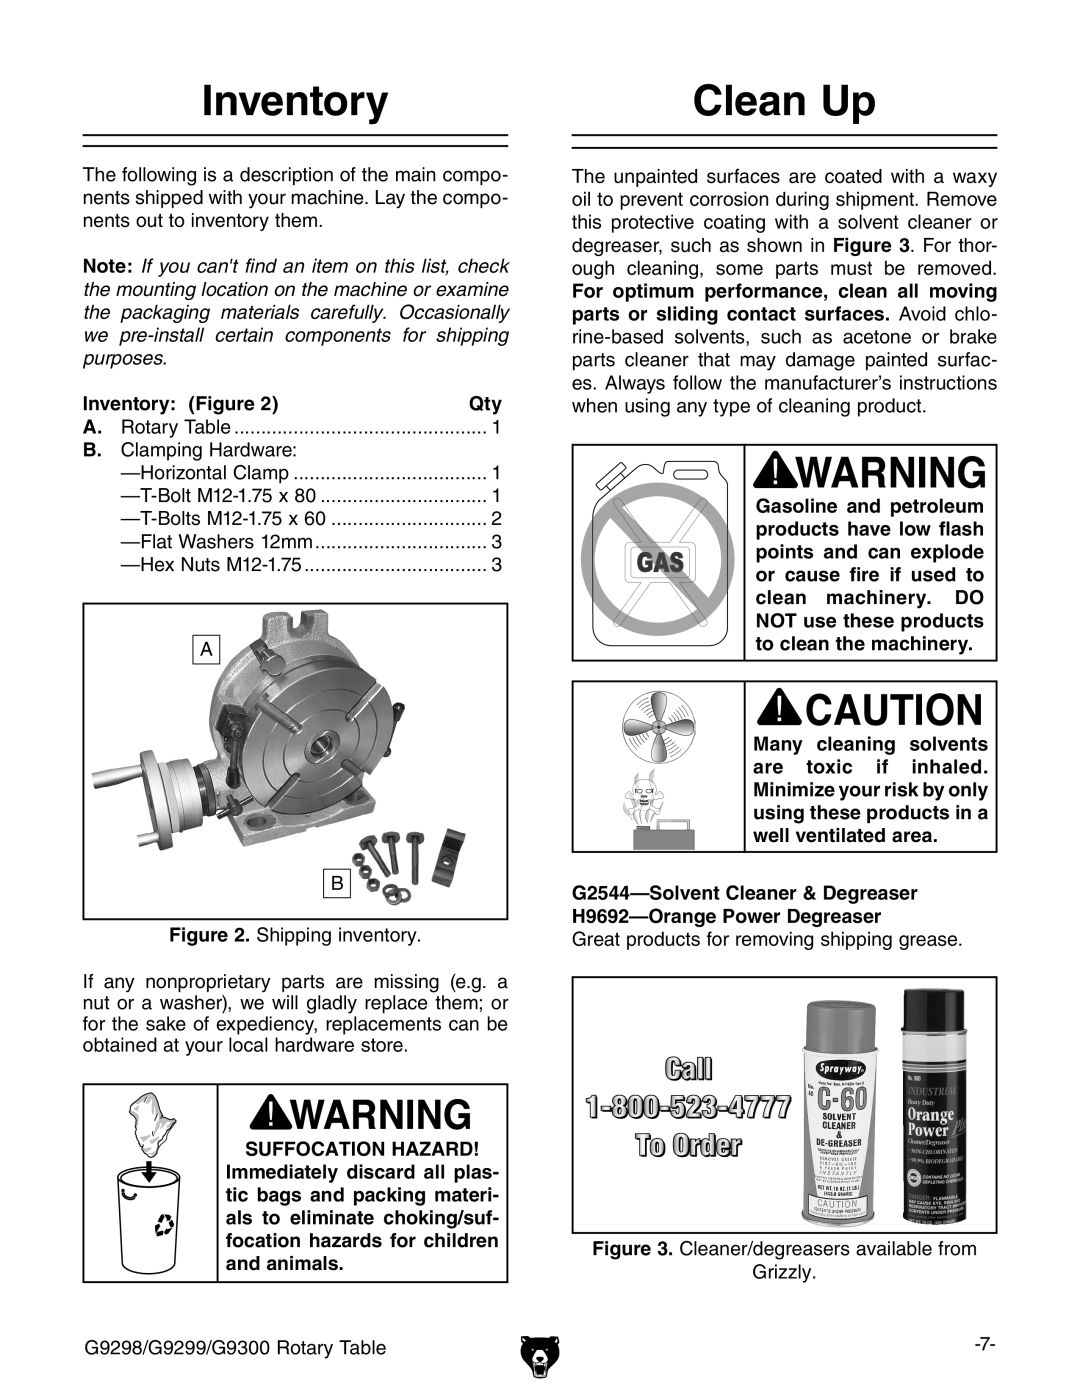 Grizzly G9298 owner manual Clean Up, Inventory Figure, Suffocation Hazard 